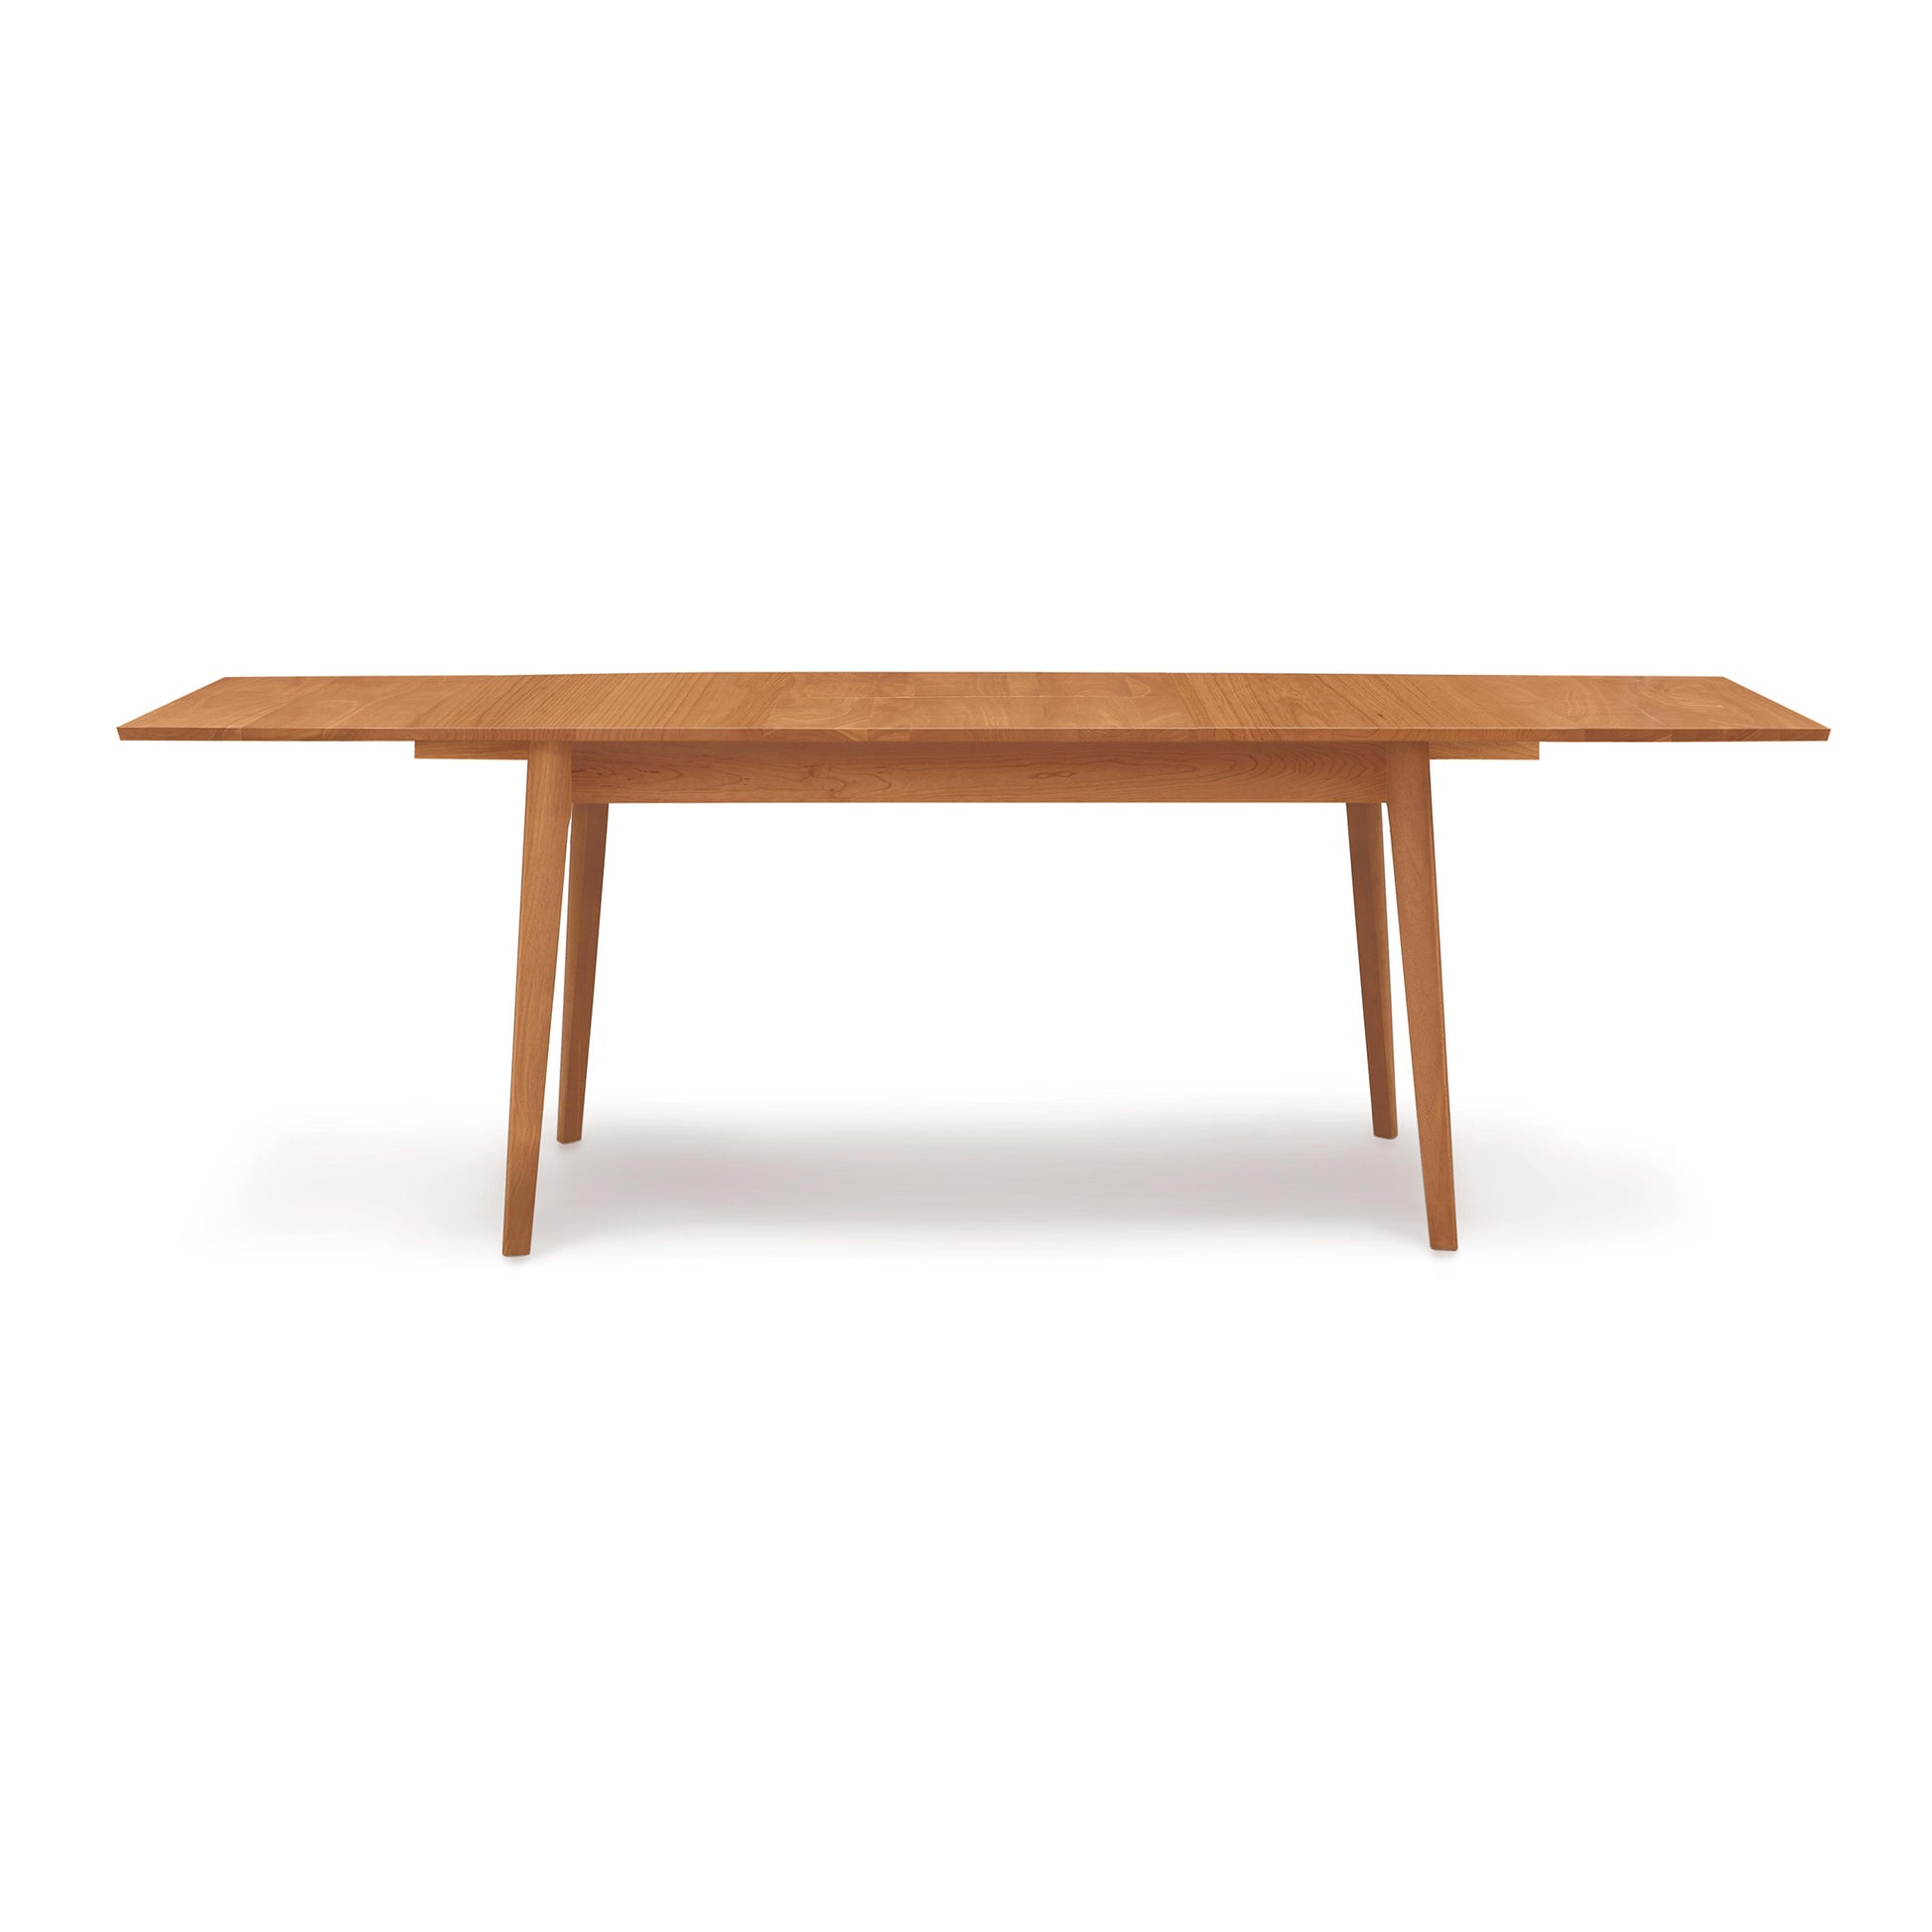 A Copeland Furniture Catalina Extension Table with a solid wood top.